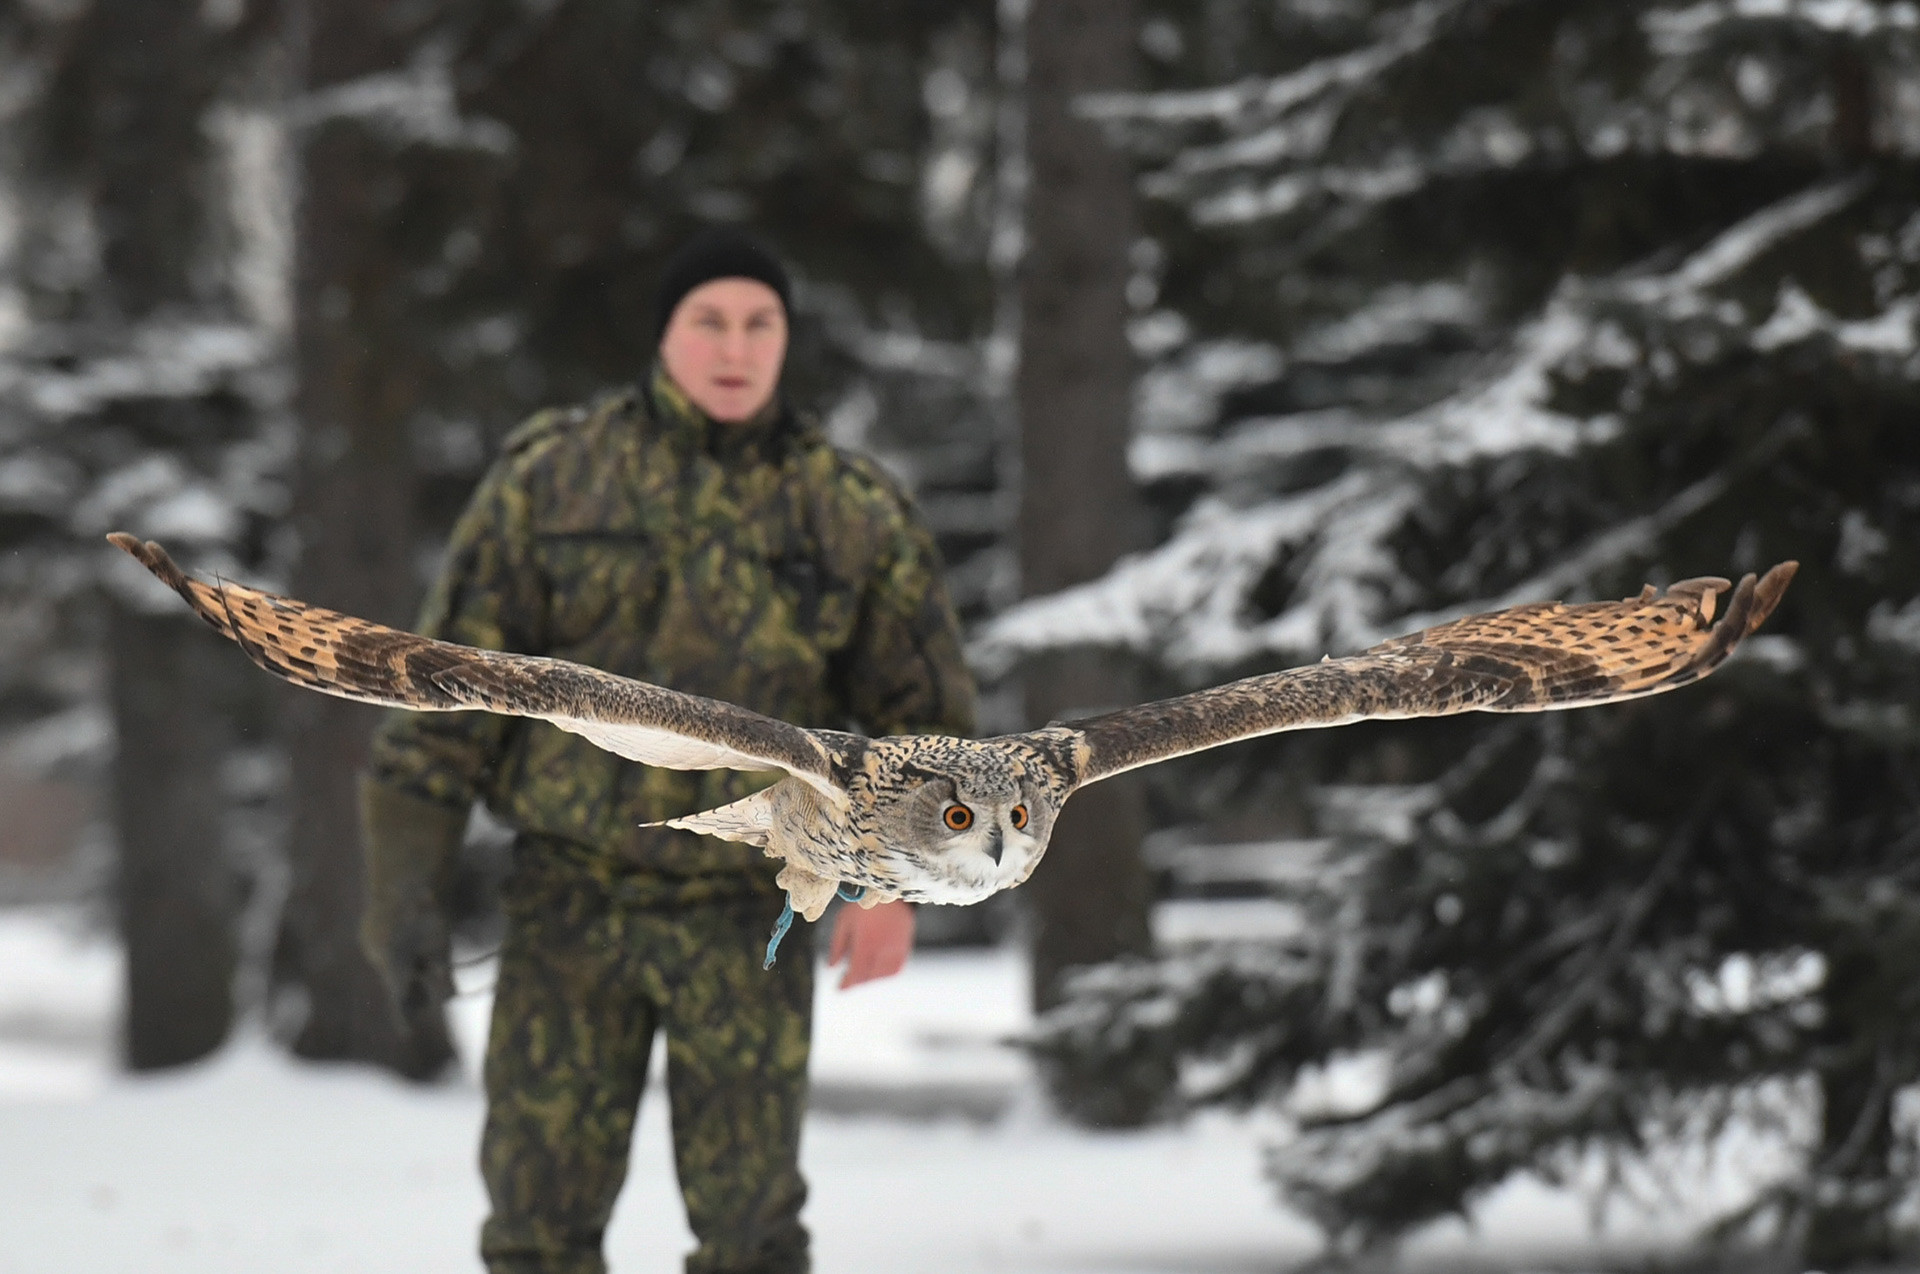 A serviceman of the Falcon Service of Moscow Kremlin's Commandant Office is seen here with an eagle owl.